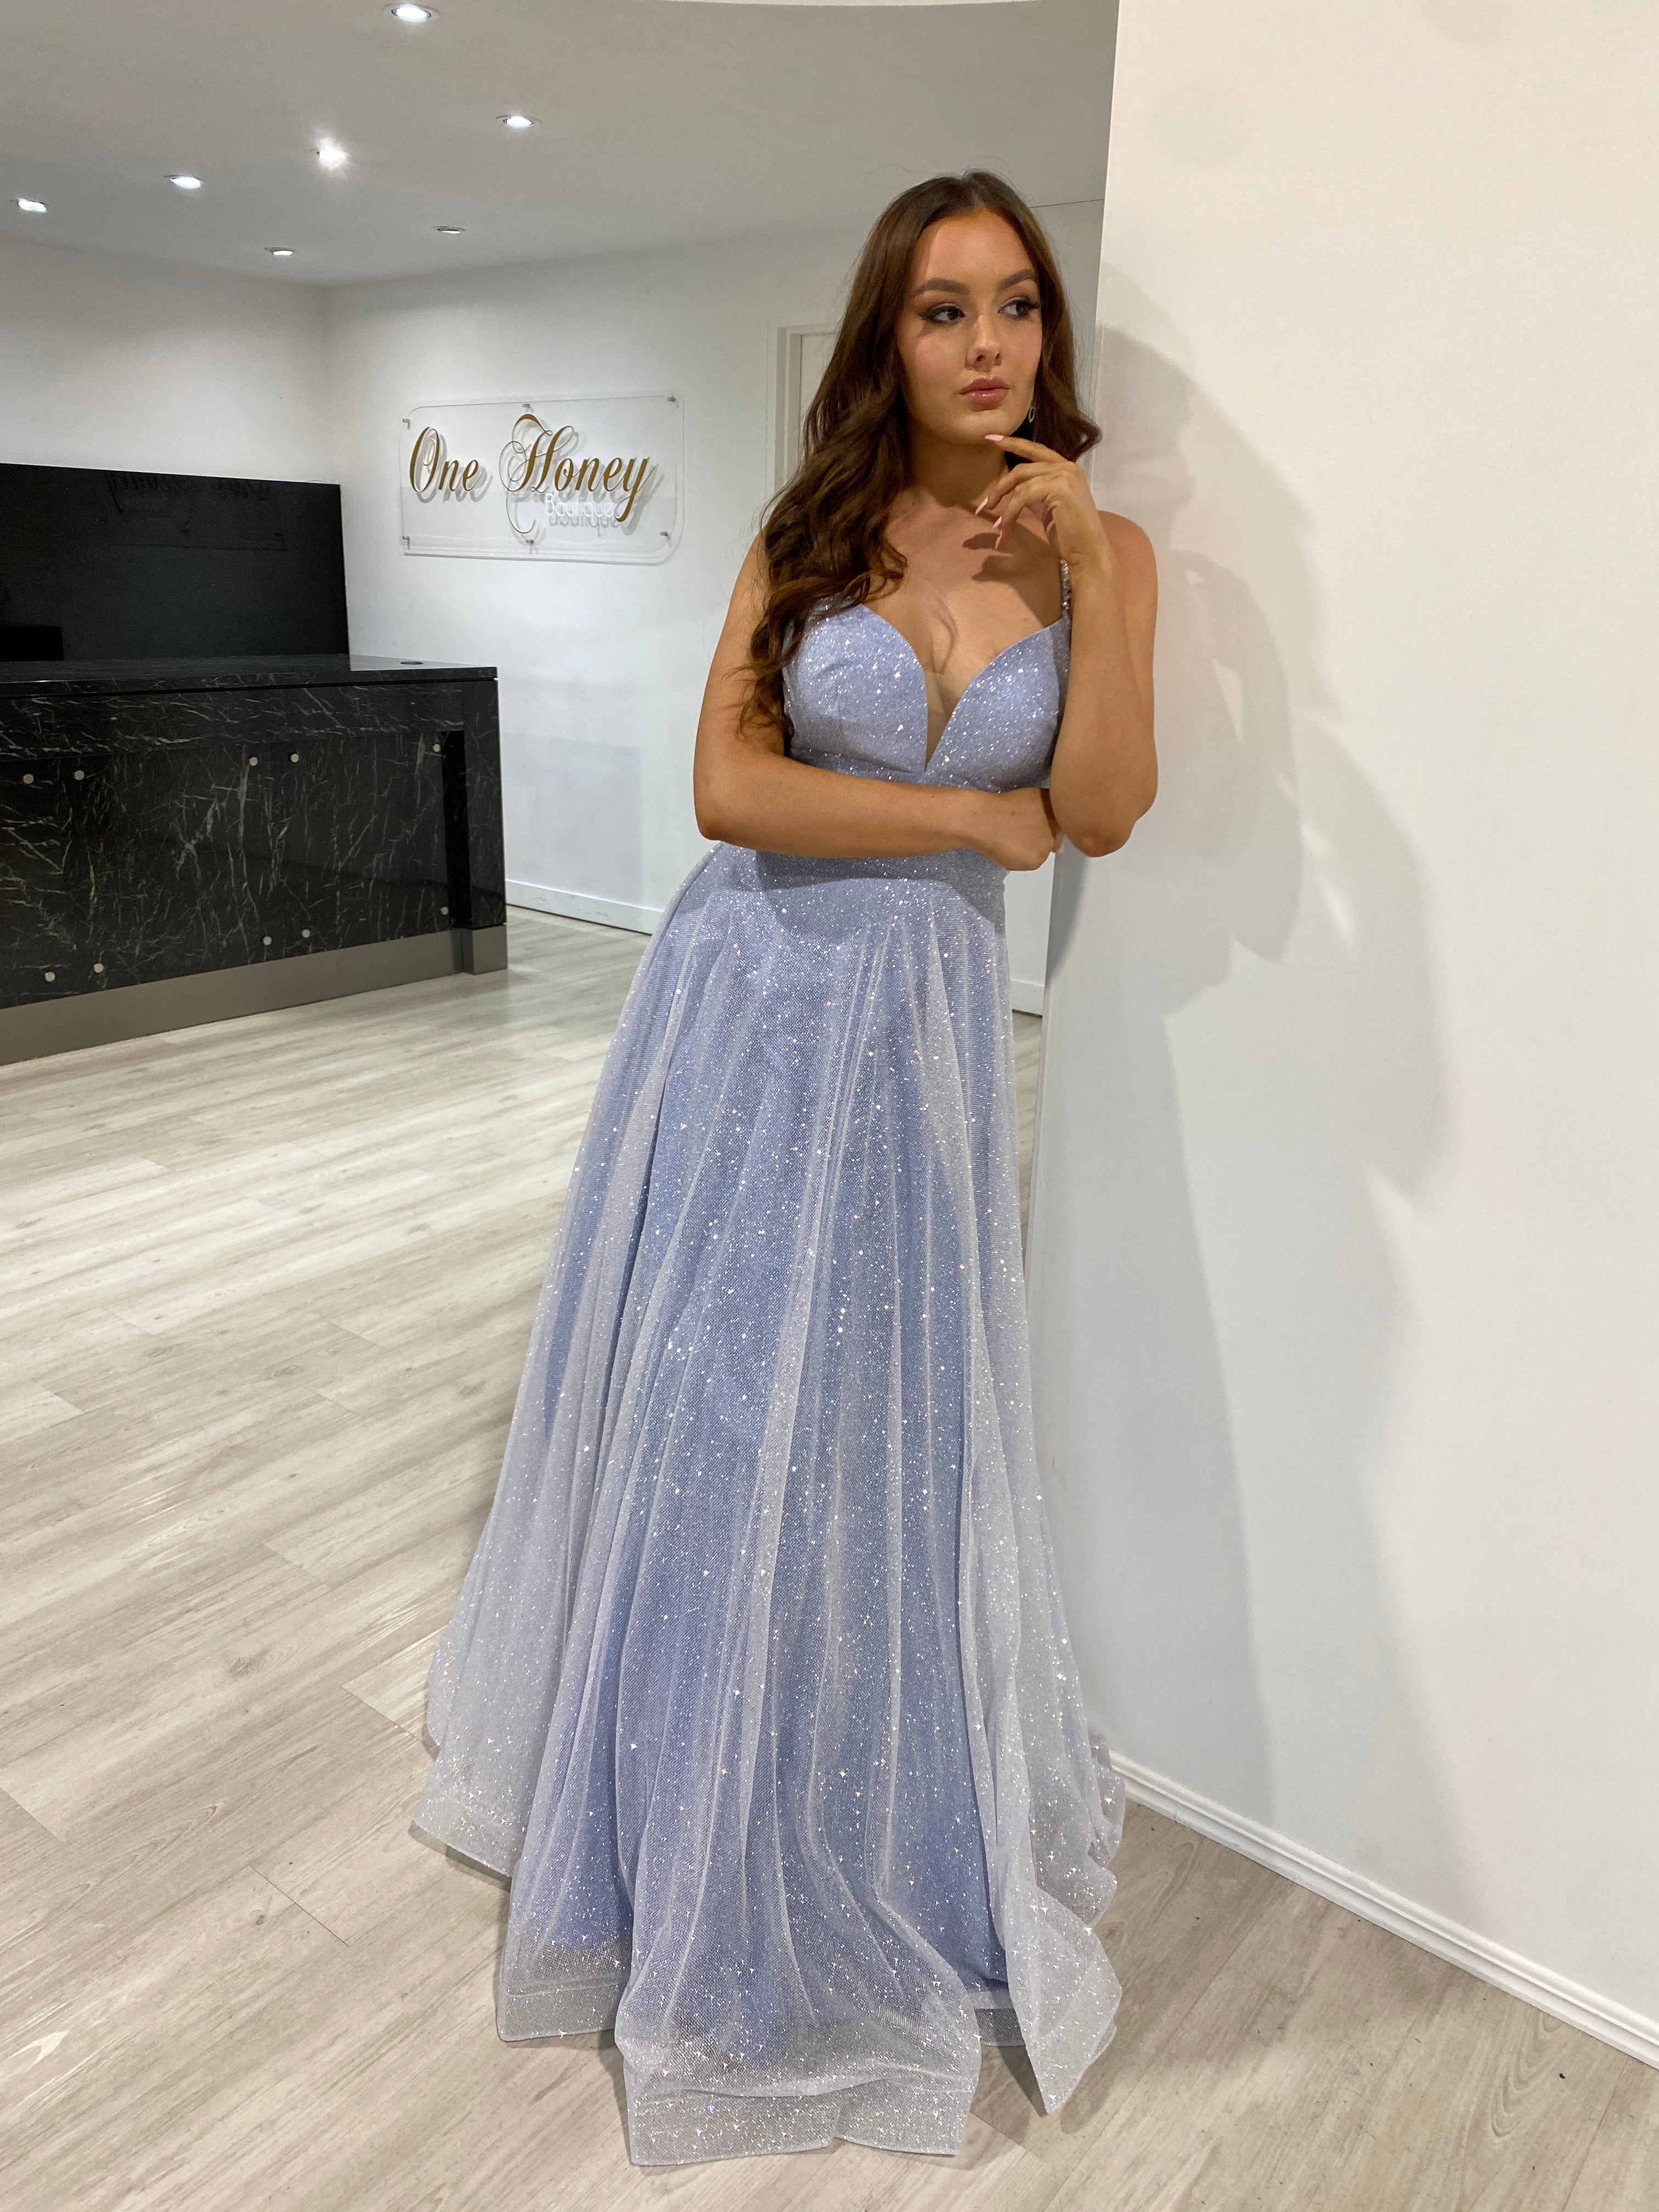 Honey Couture LIVIA Baby Blue Silver Glitter Ball Gown Formal Dress